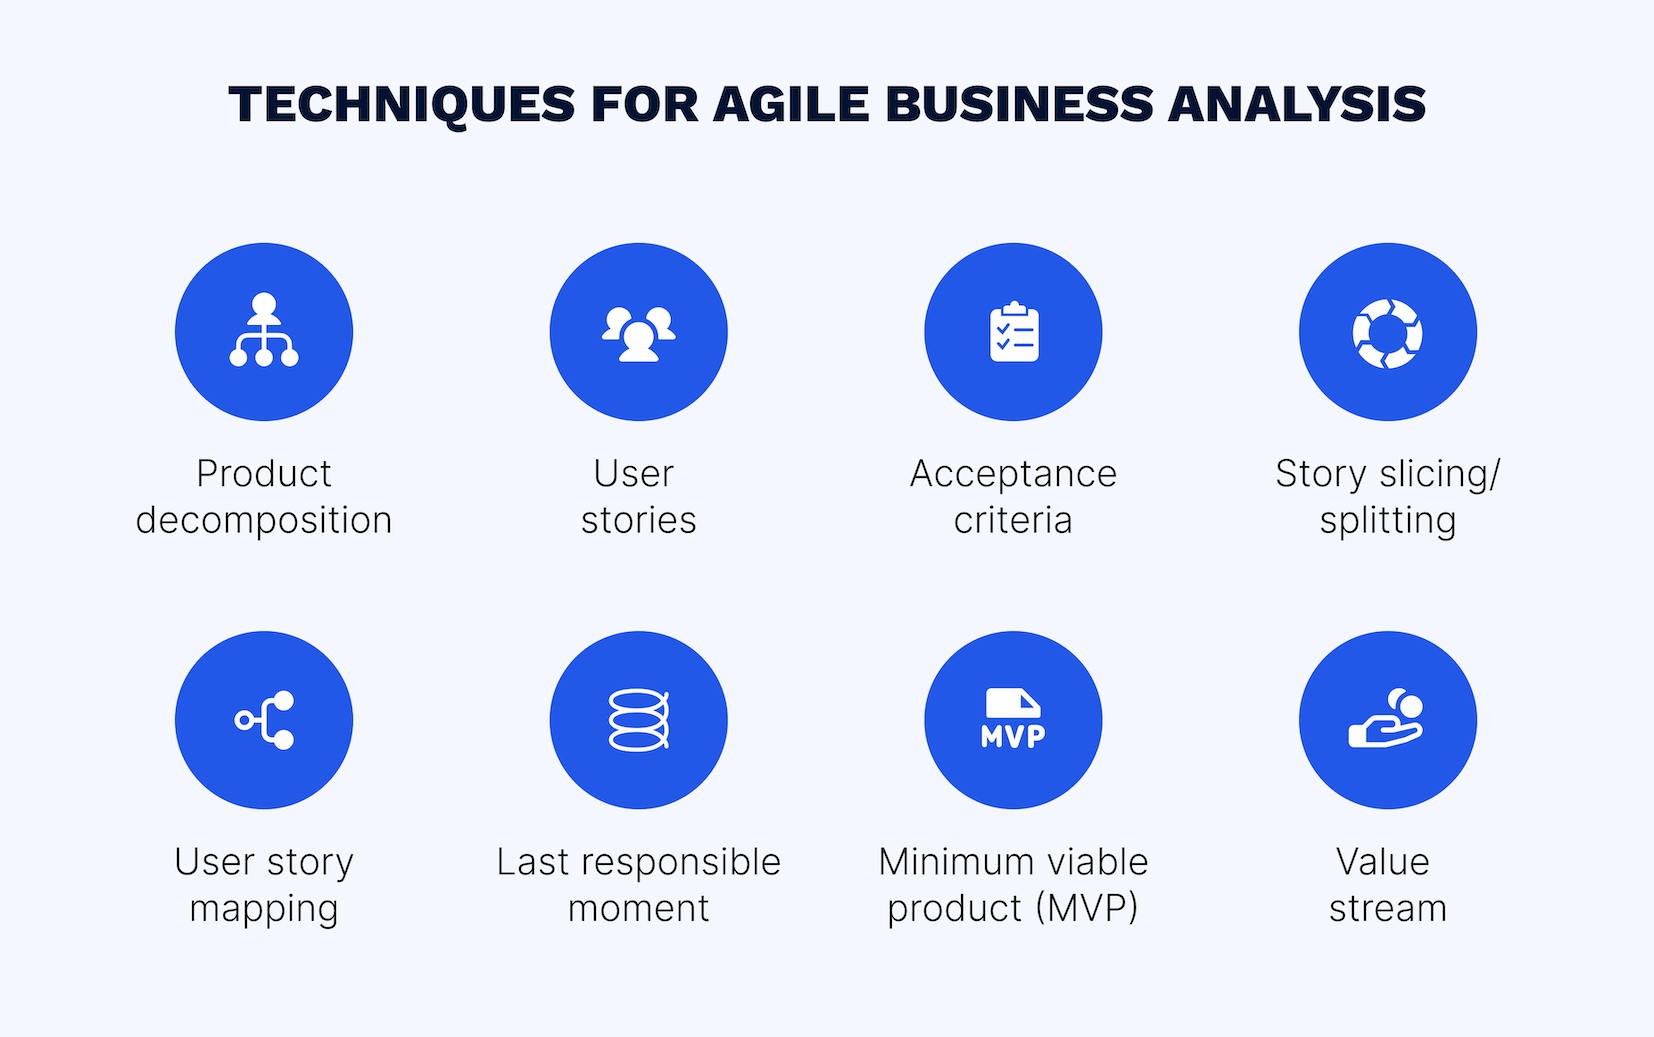 Agile business analysis techniques and best practices